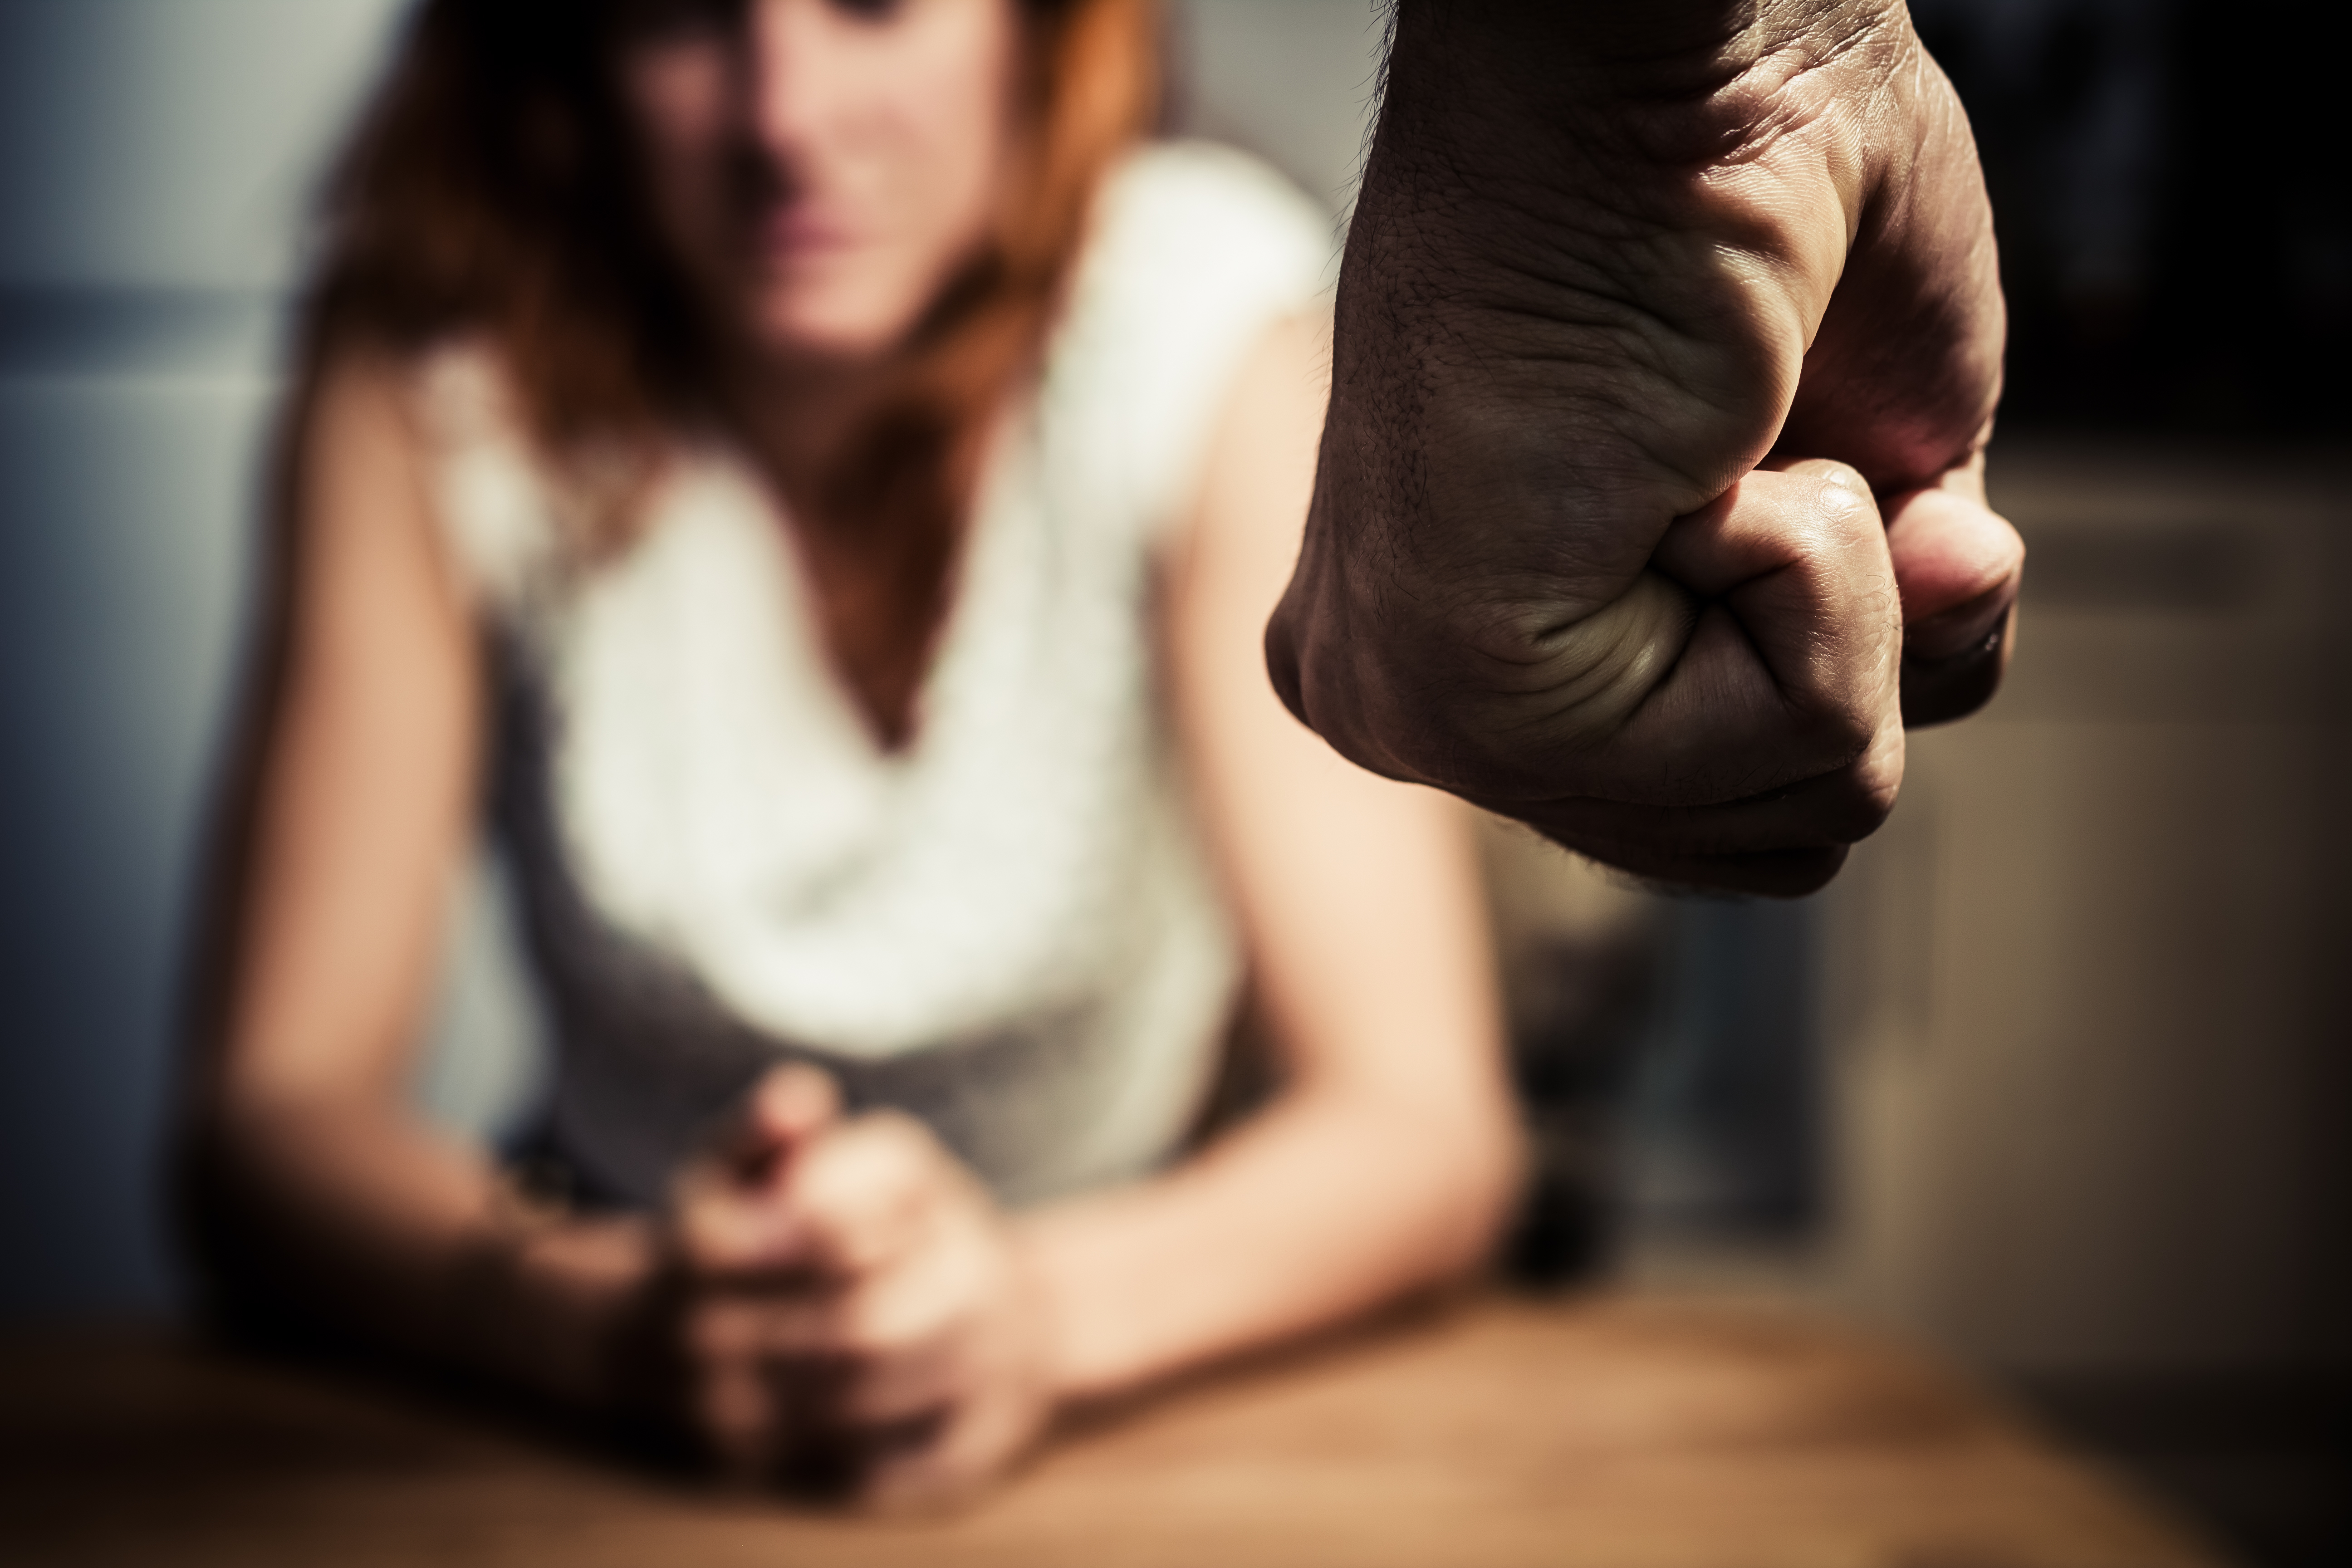 Man with fist clenched to assault partner in domestic violence